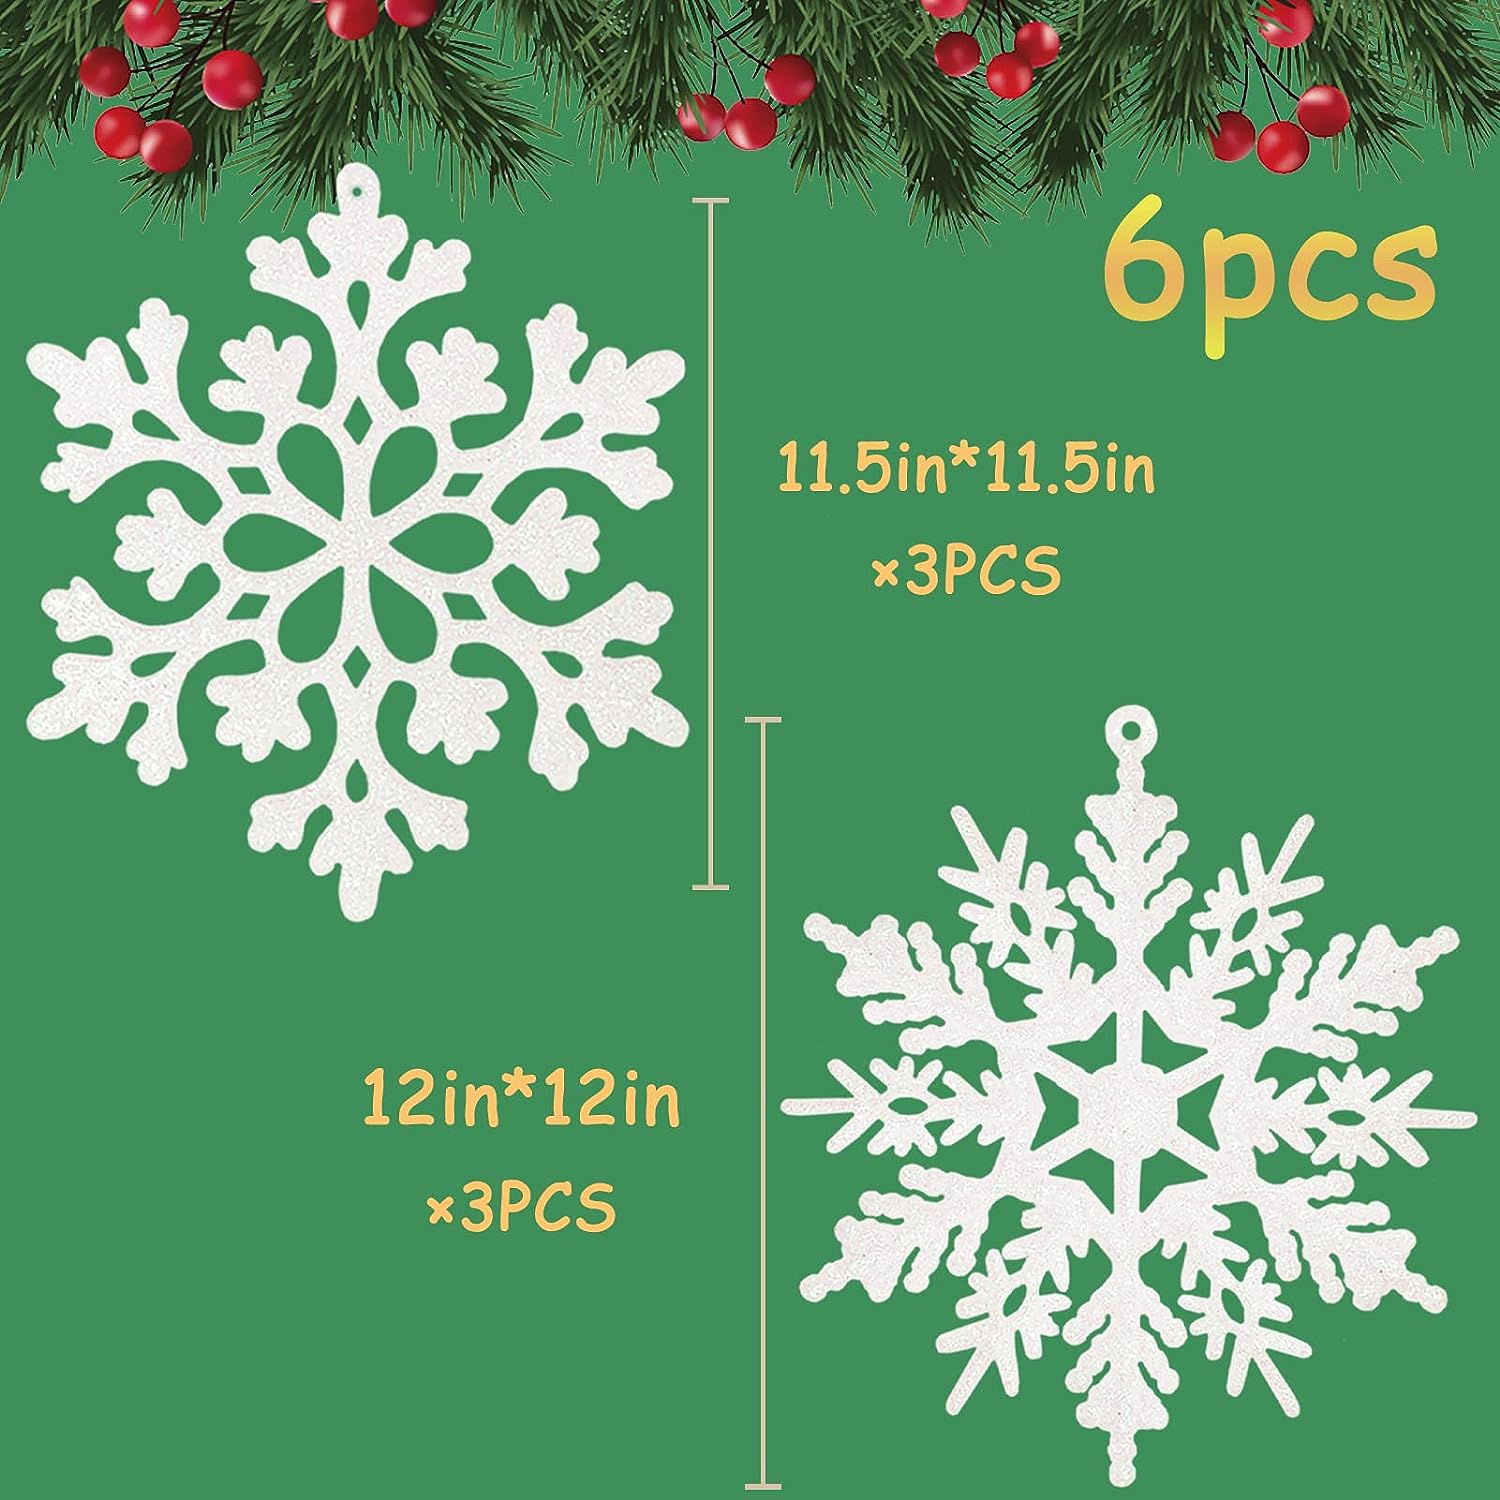 Snowflake Glitter 12" Plastic Snowflakes Ornaments for Winter Indoor Outdoor Christmas, 6 Pieces